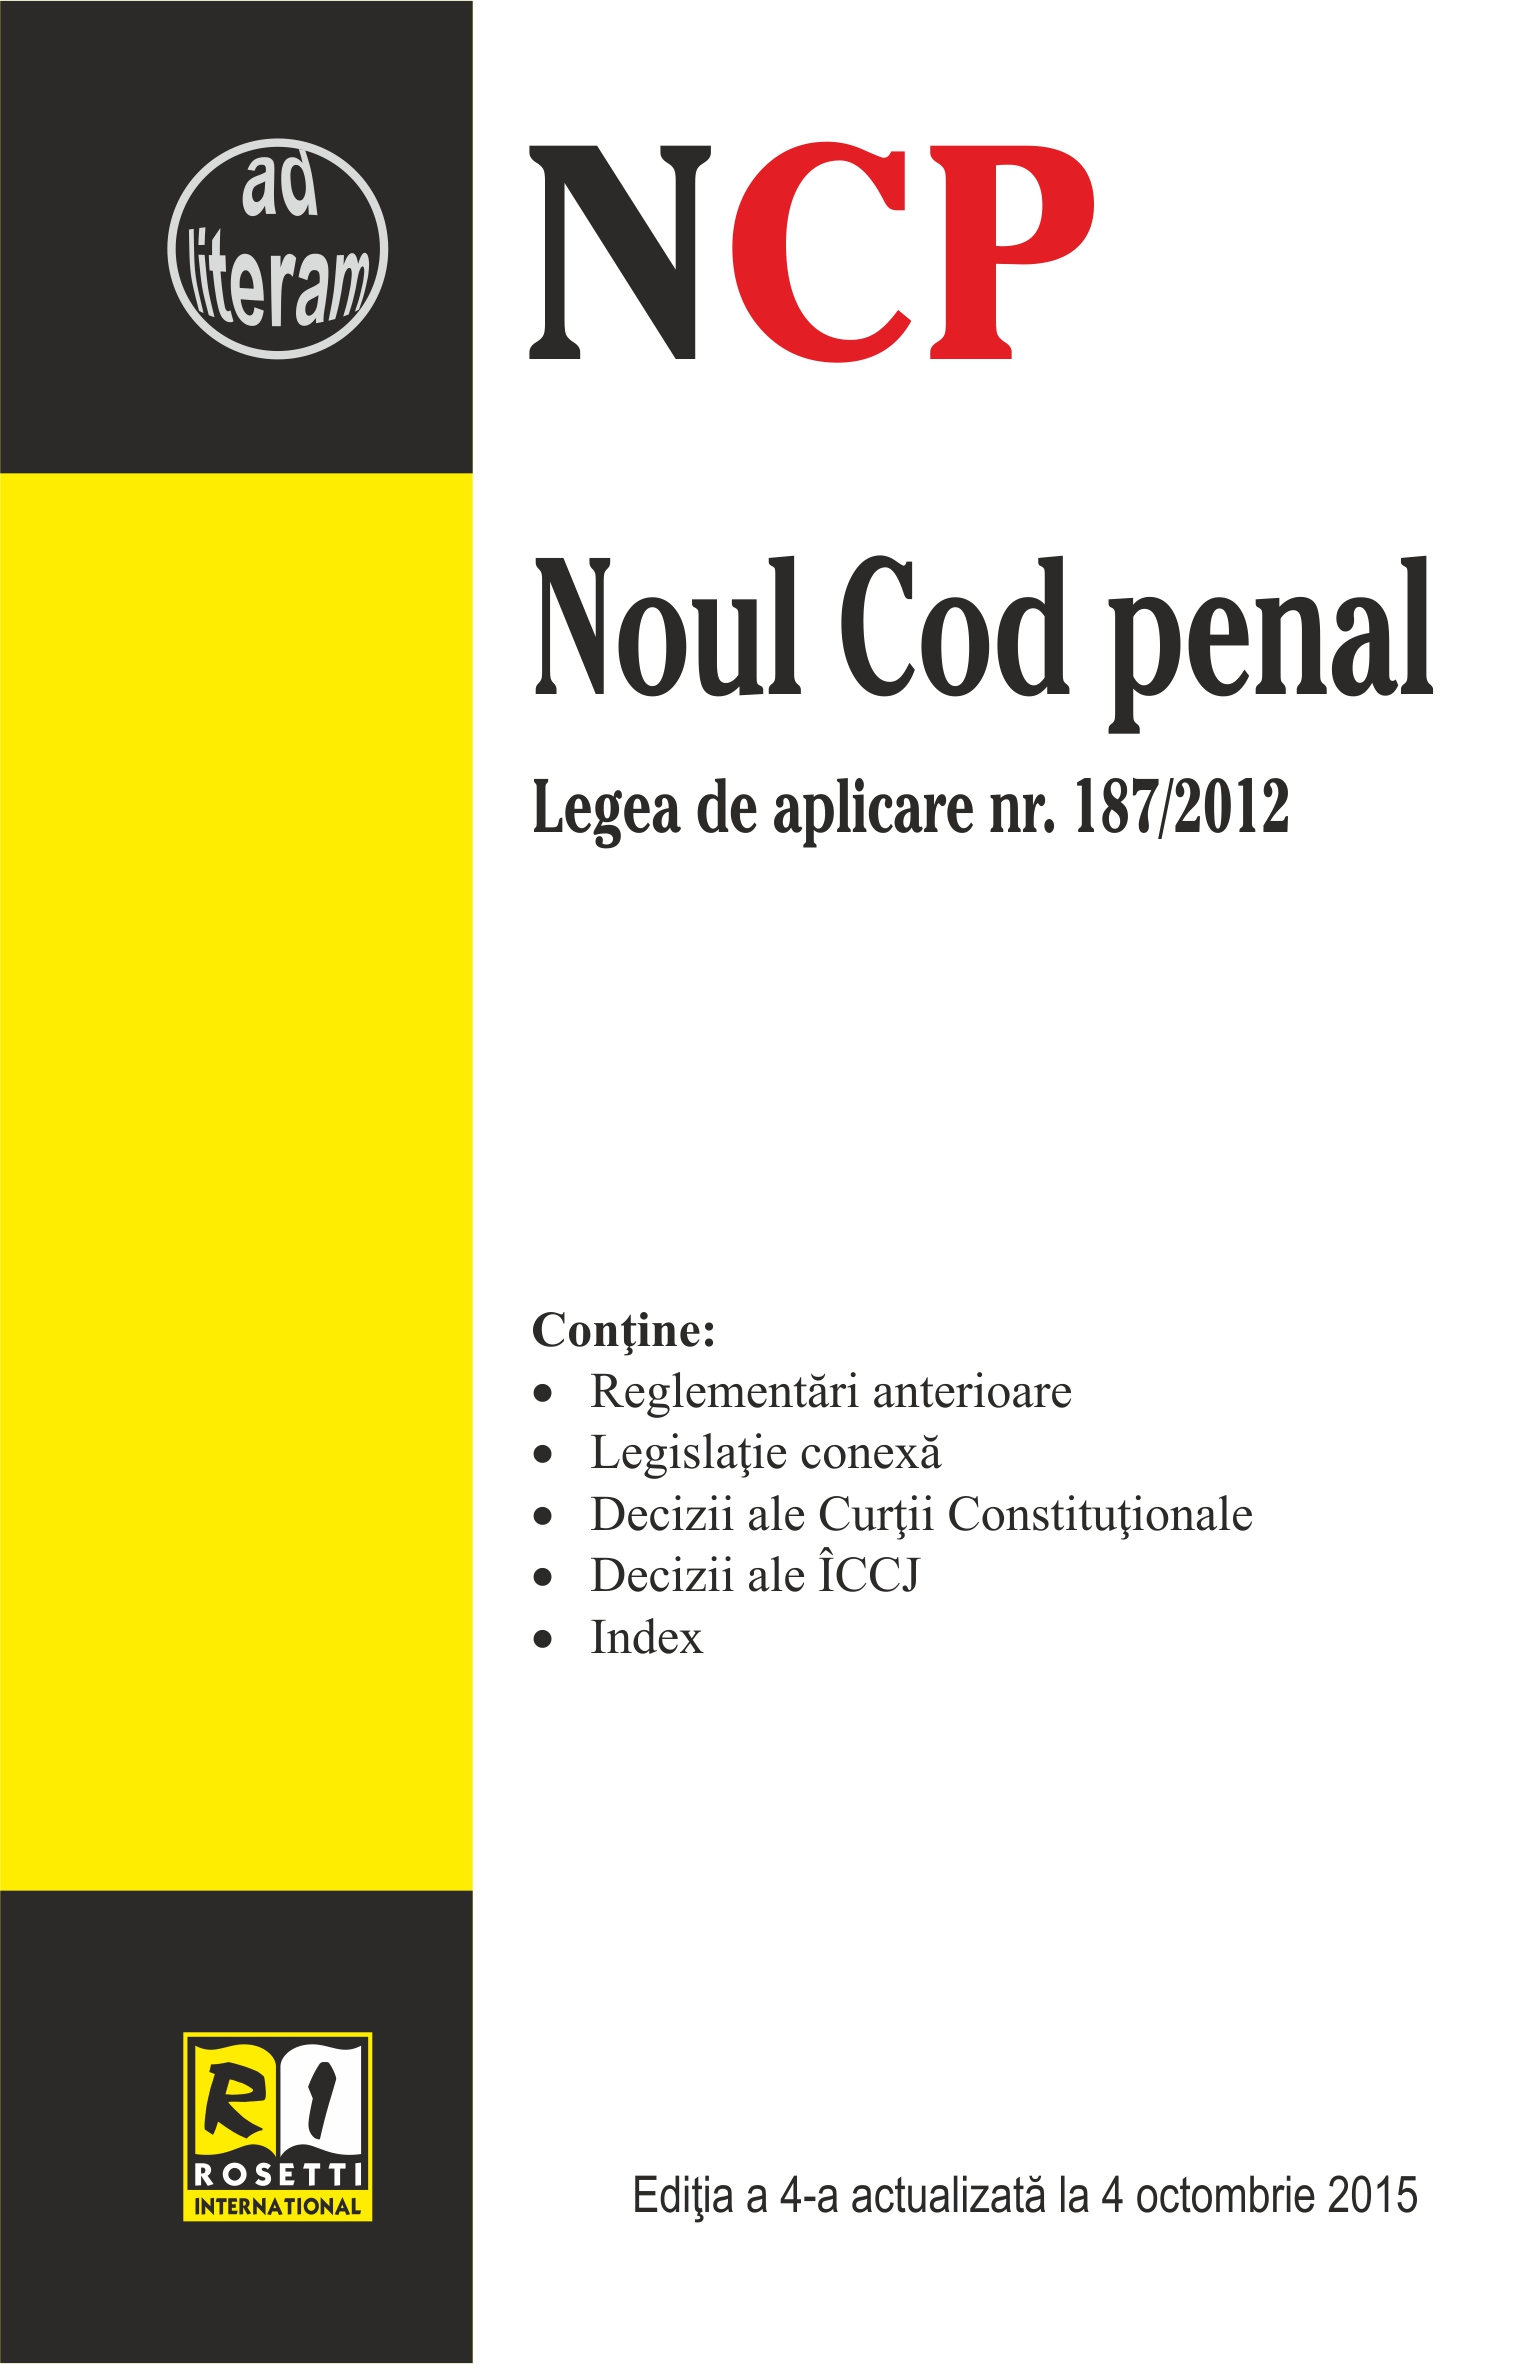 Noul Cod Penal Act. 4 Octombrie 2015